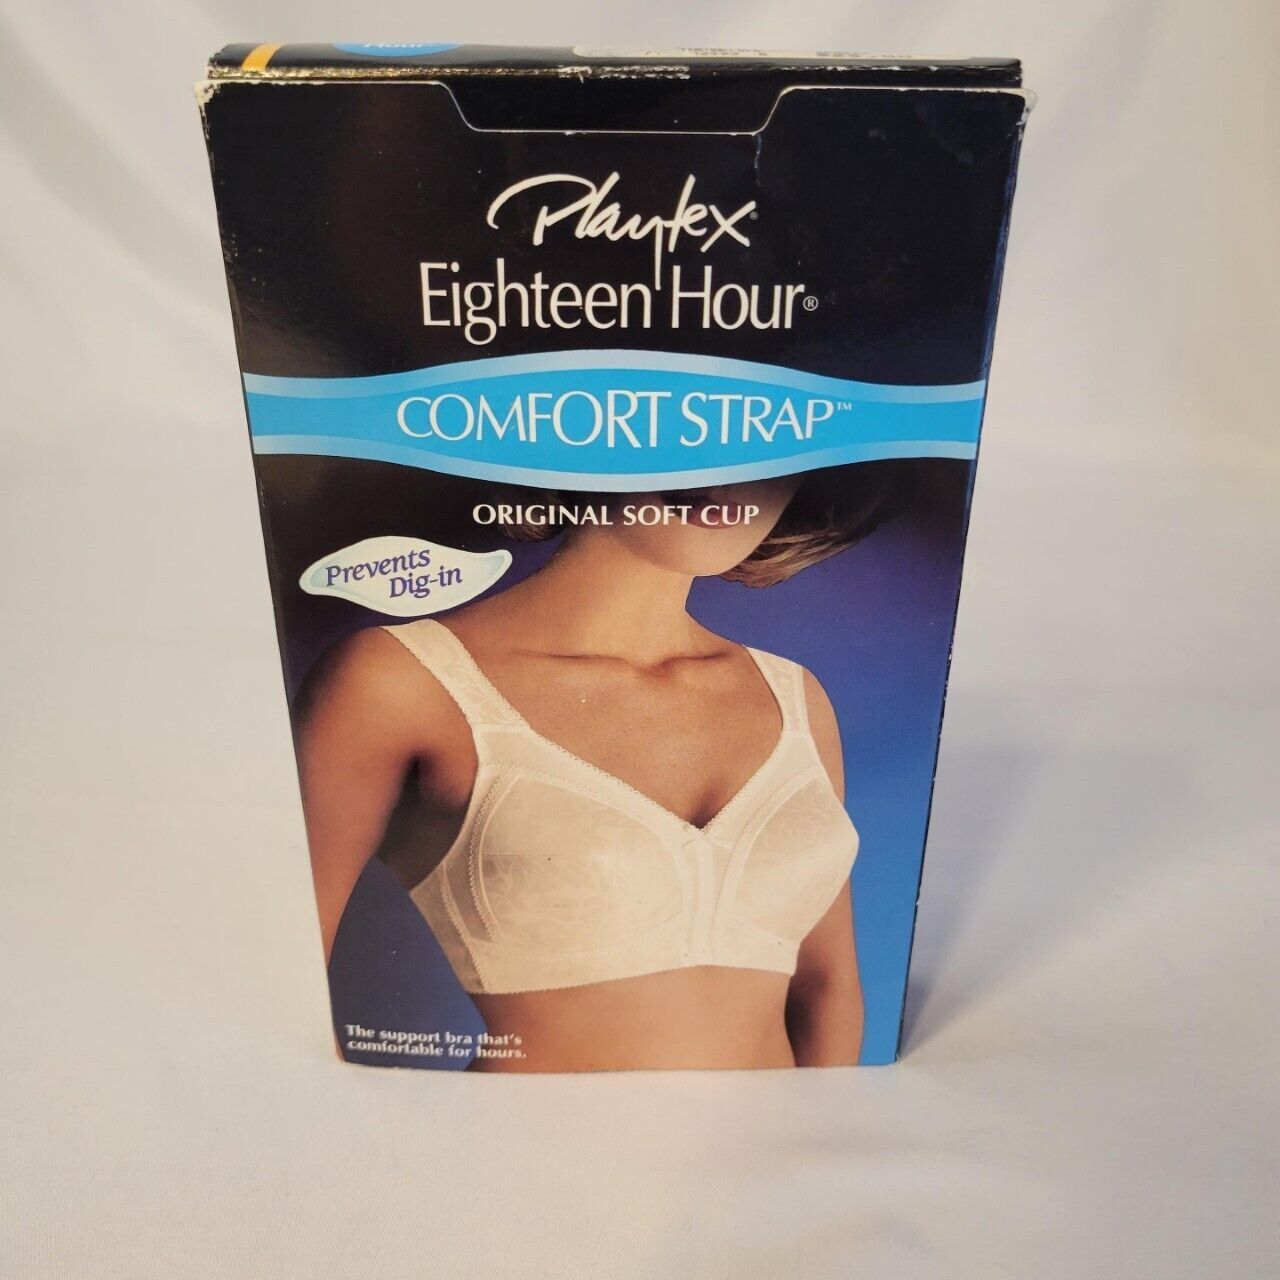 Vintage Playtex Eighteen Hour Comfort Strap and 50 similar items